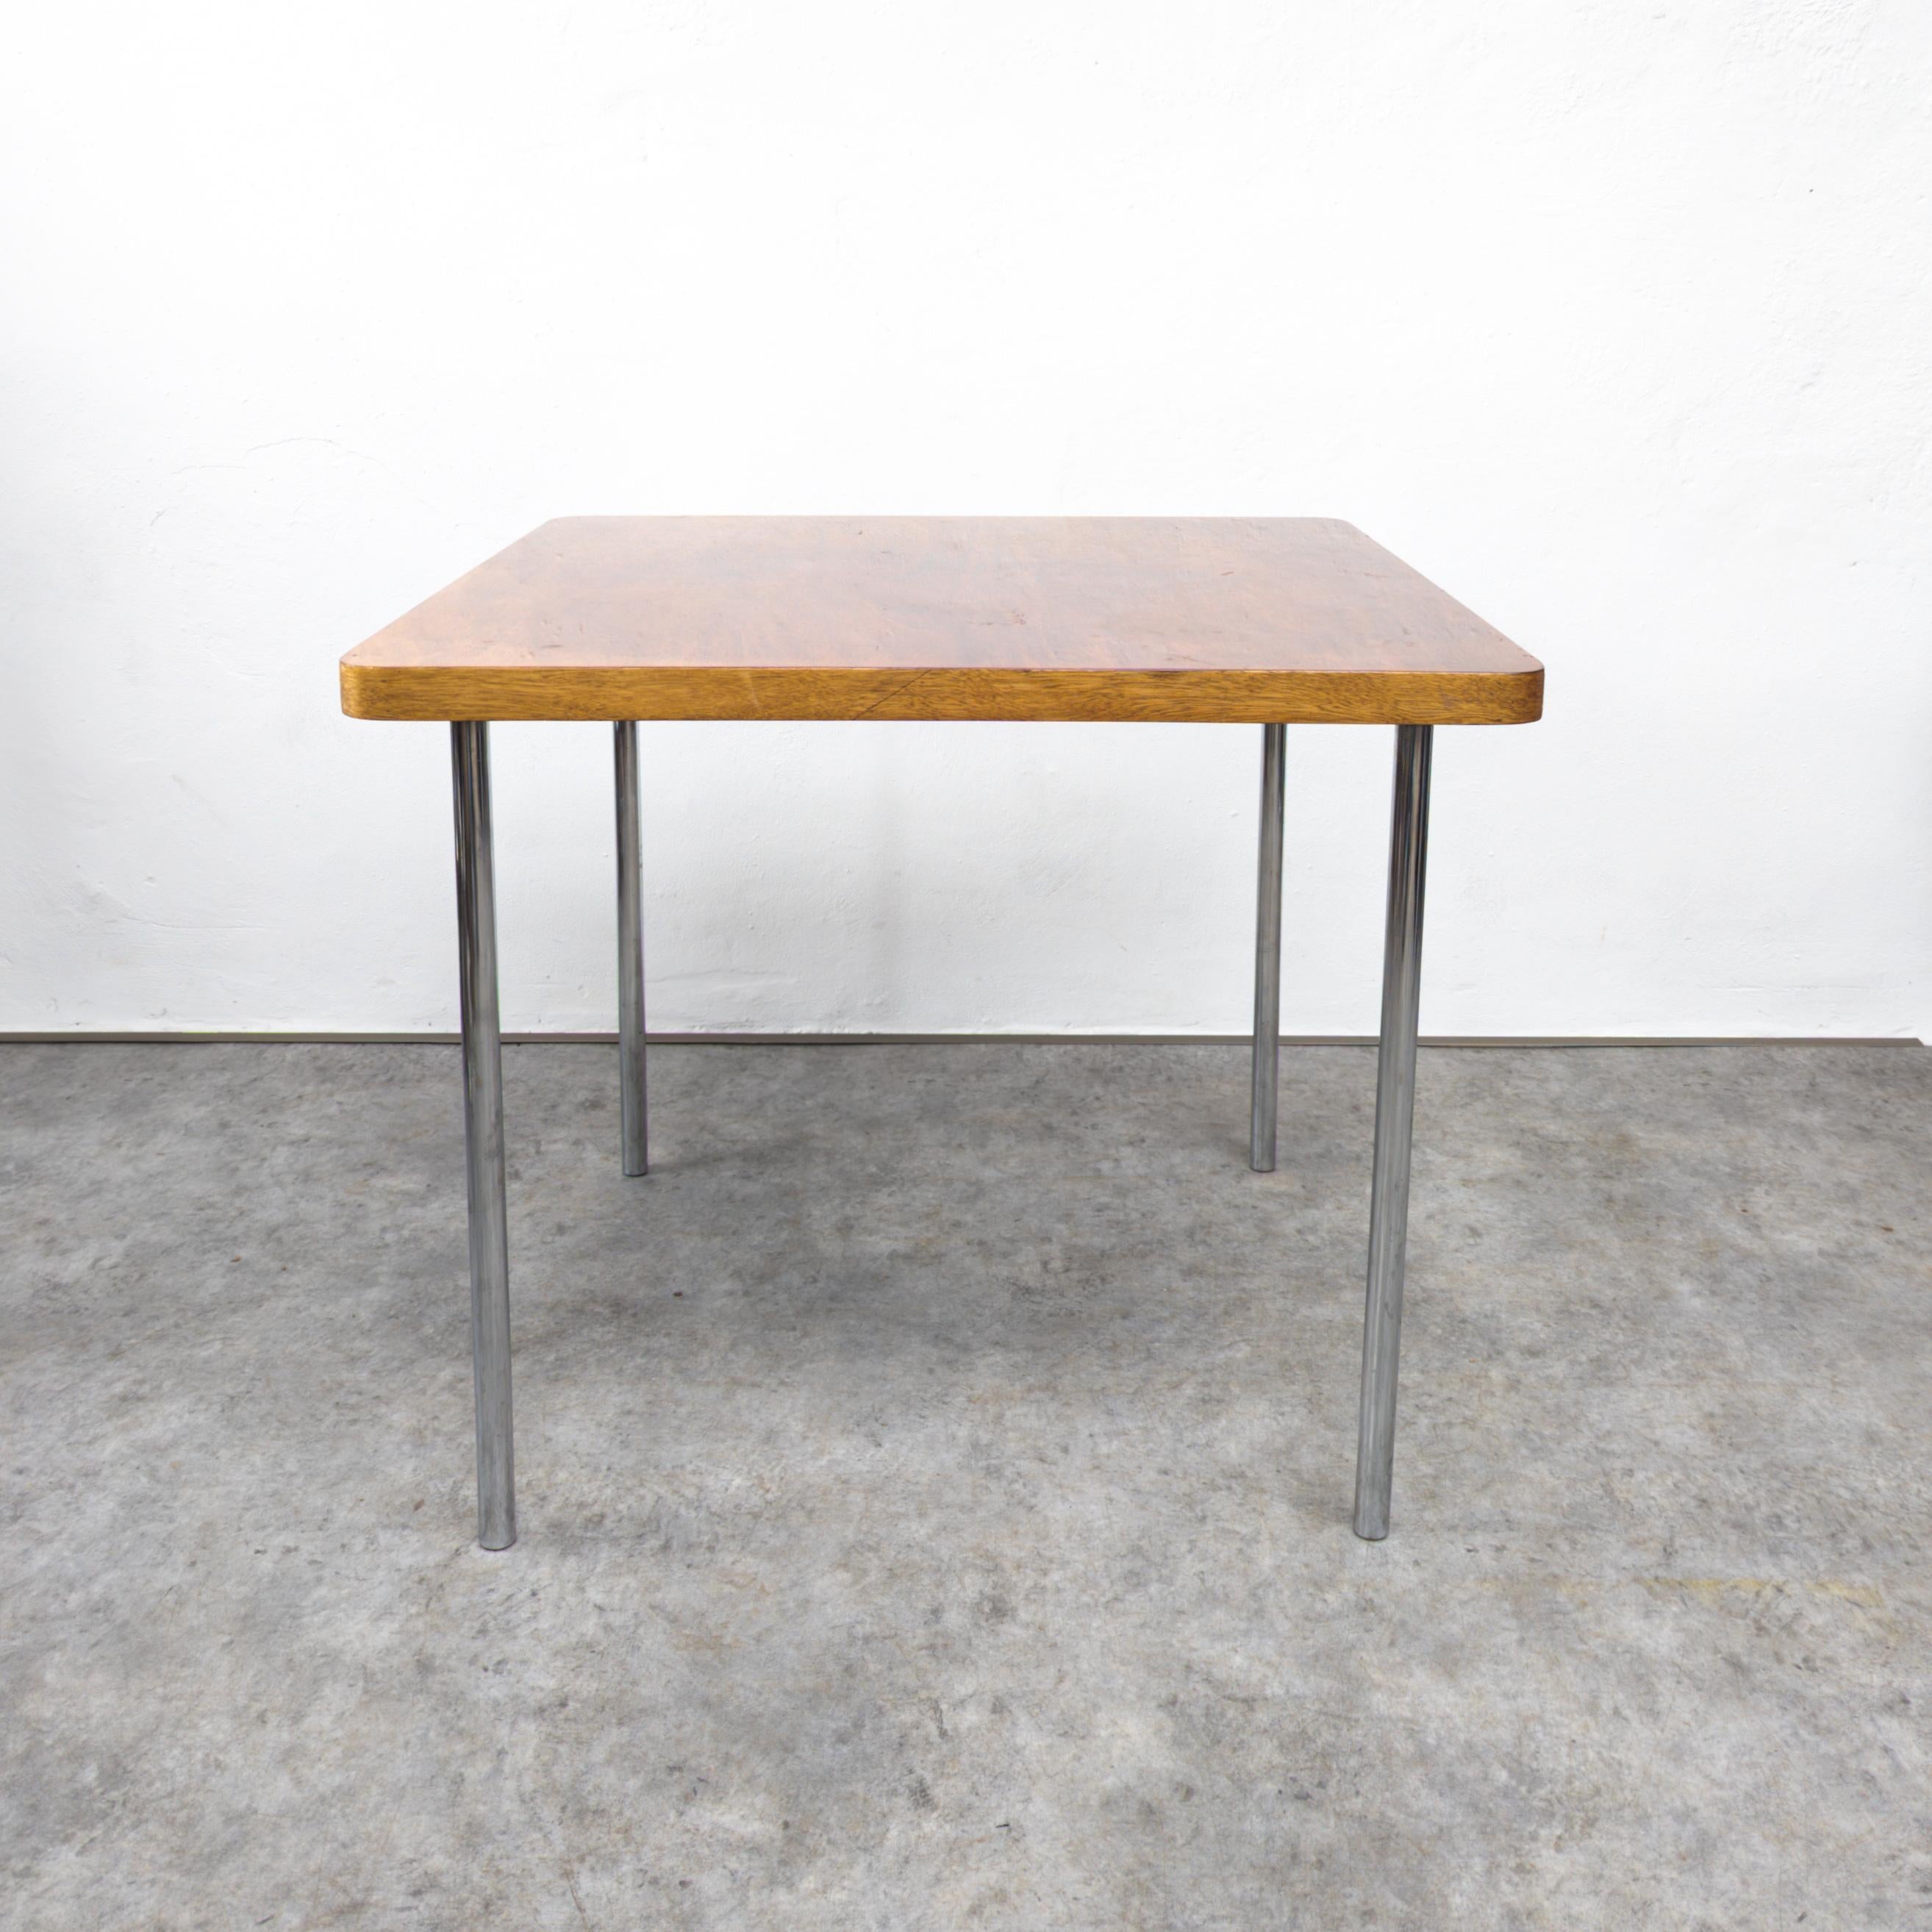 The Thonet B 14 table, designed by Marcel Breuer, is a classic piece of furniture known for its innovative use of tubular steel and geometric forms. It features a square wooden top supported by straight chrome plated steel legs, creating a simple